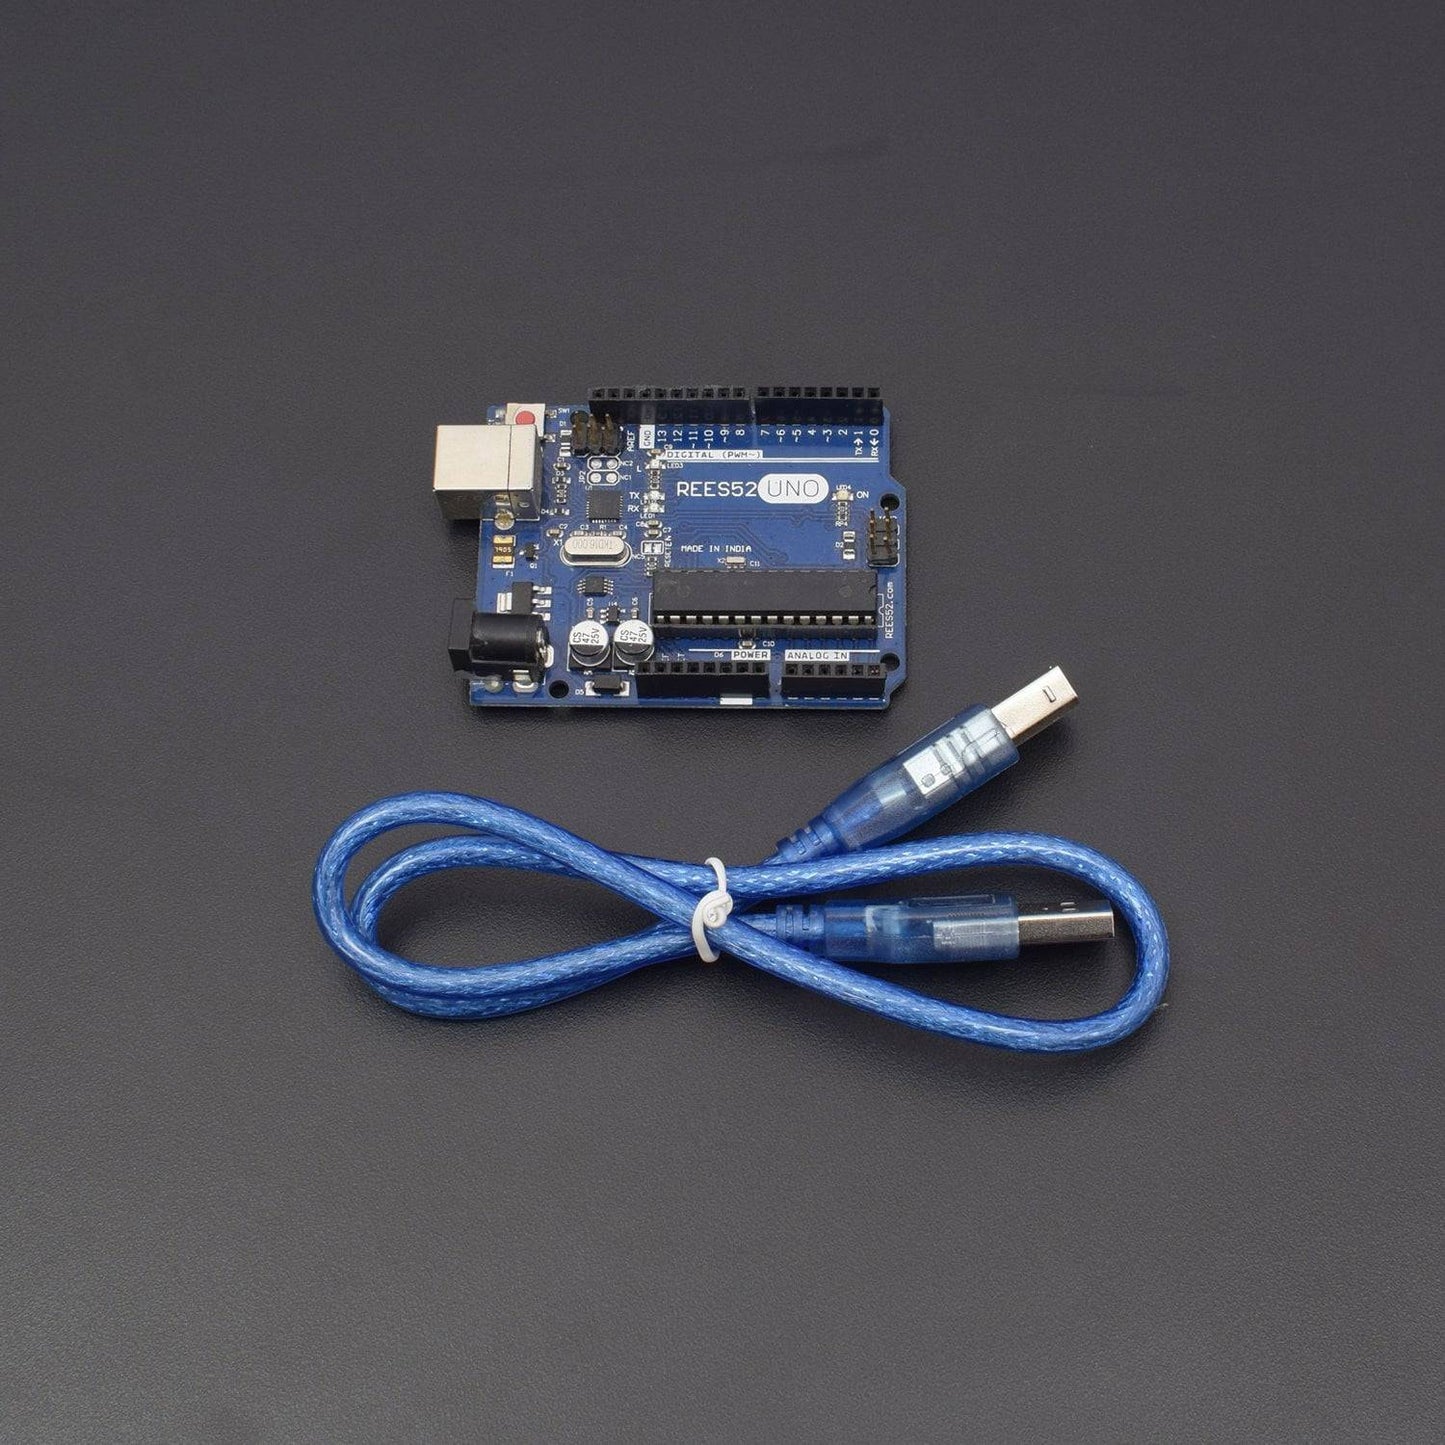 Test a GY-9150 MPU-9150 3-Axis Electronic Compass Acceleration Gyroscope Module Interfacing with Arduino Uno - KT701 - REES52